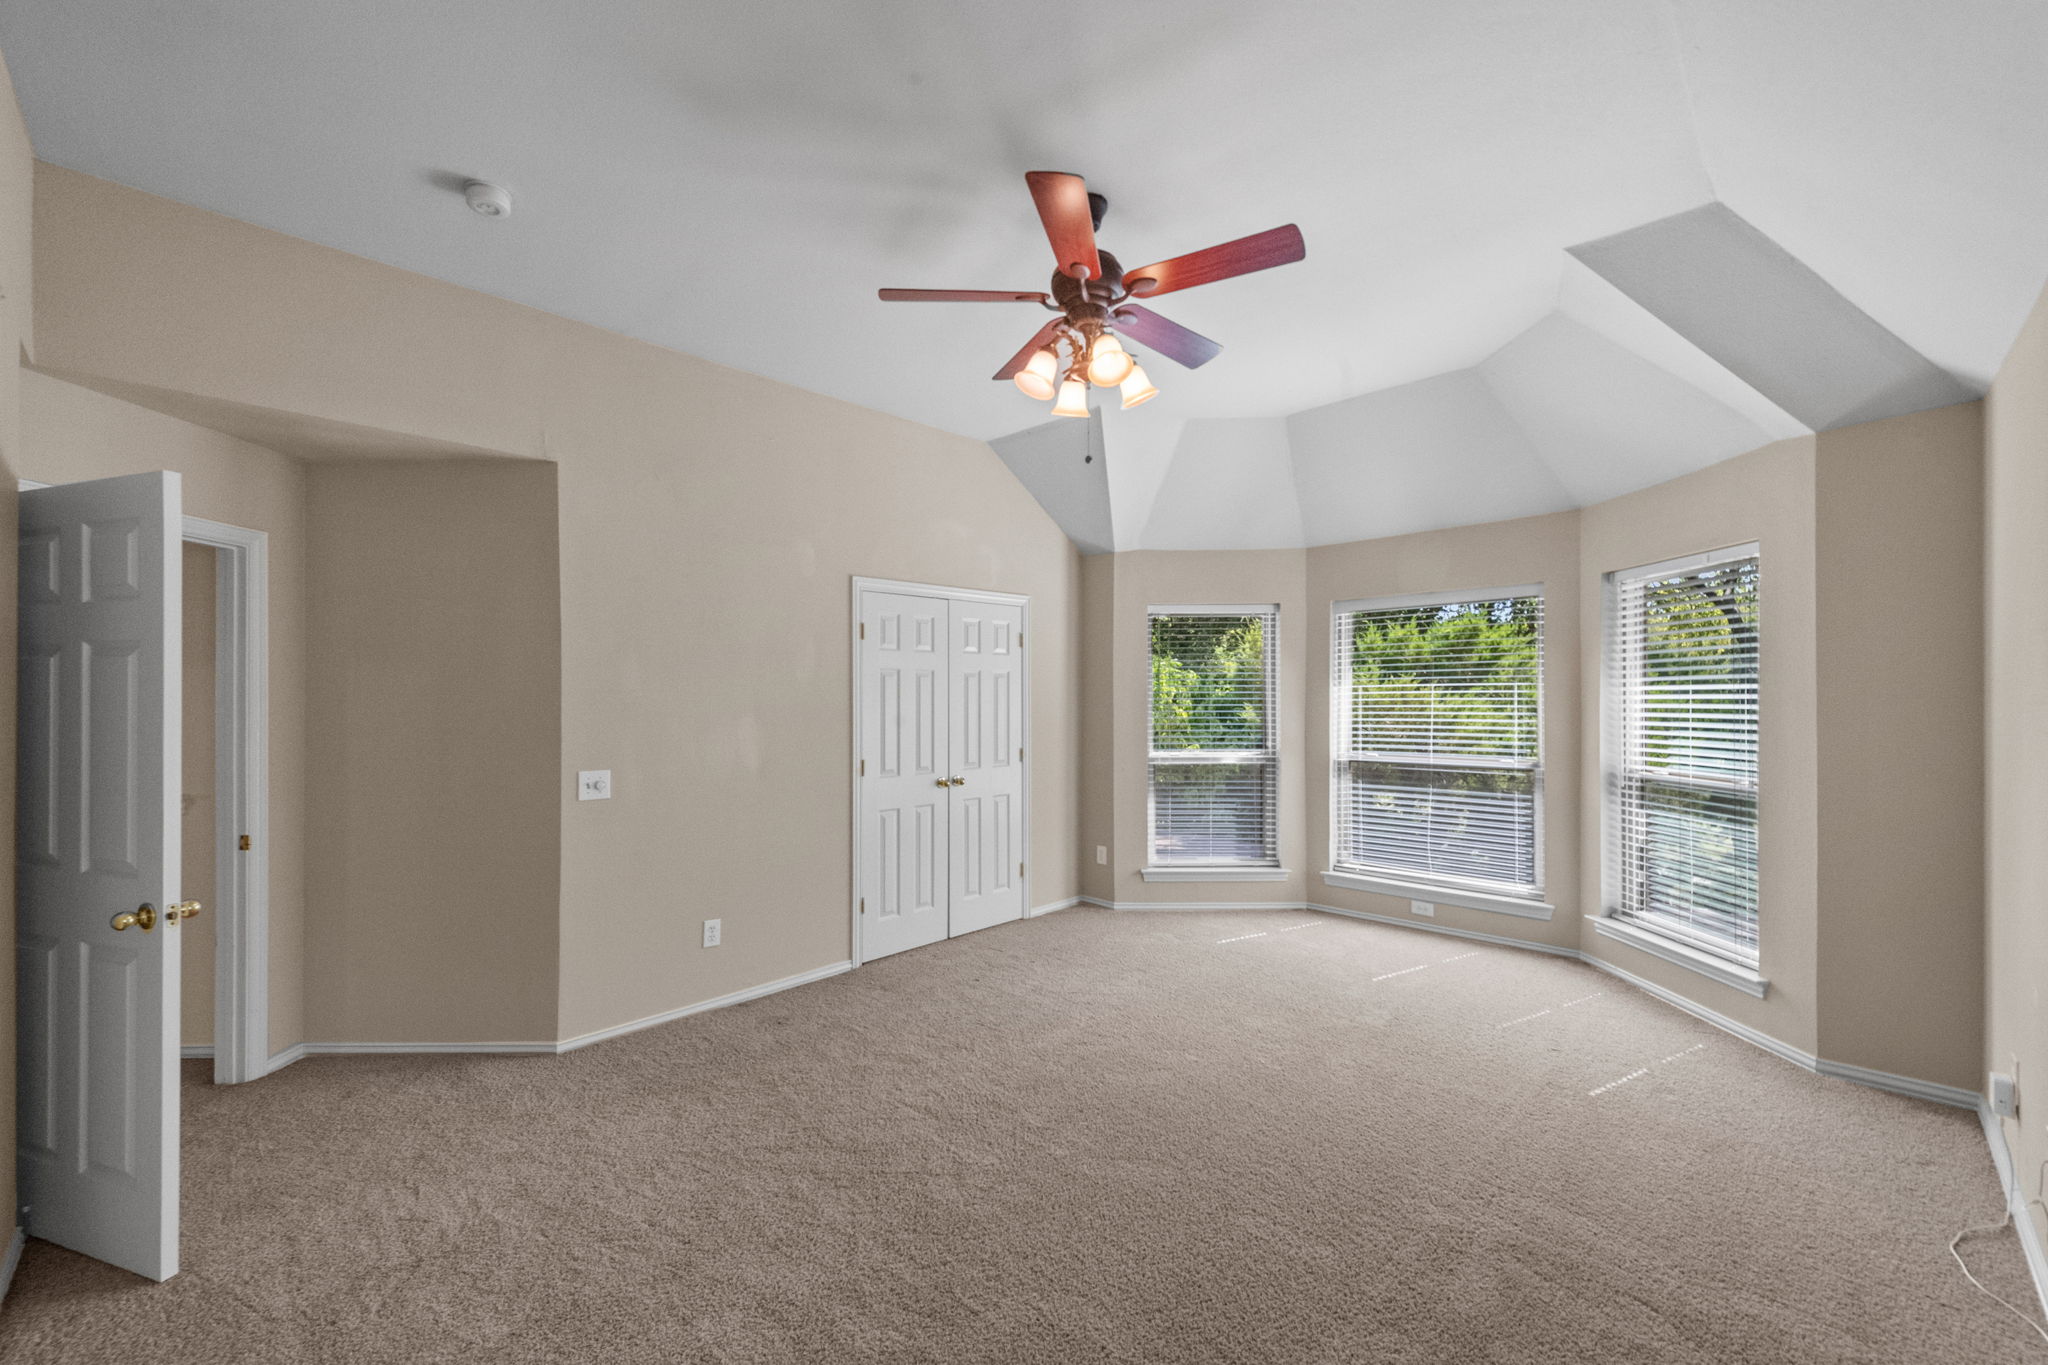 Game room, media room, office or make it another bedroom upstairs. The beautiful windows open to the backyard.